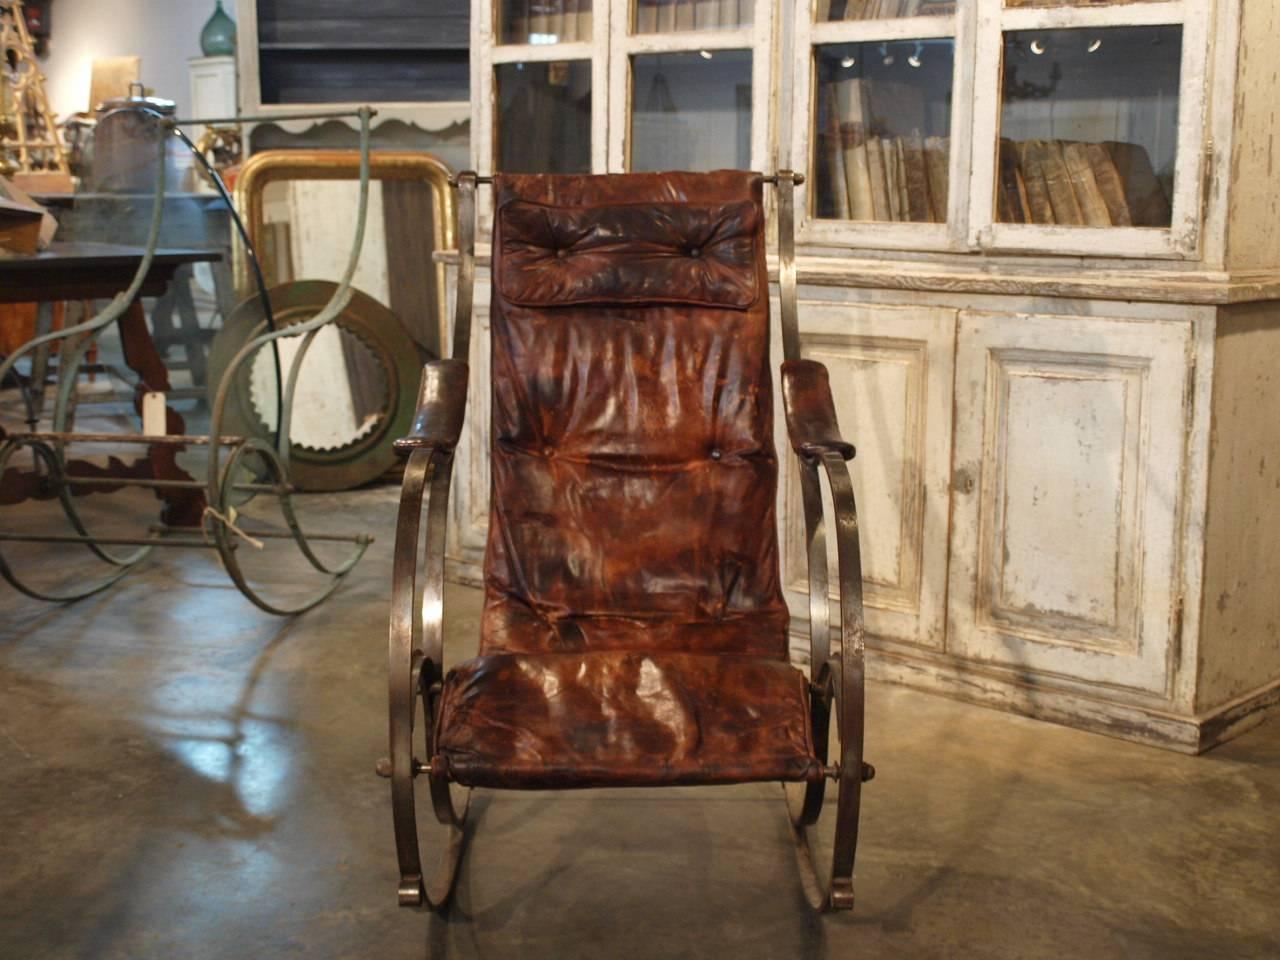 A terrific English spring steel and leather rocking chair attributed to RW Winfield, Birmingham England. The original patent for this model was created in the mid-19th century.